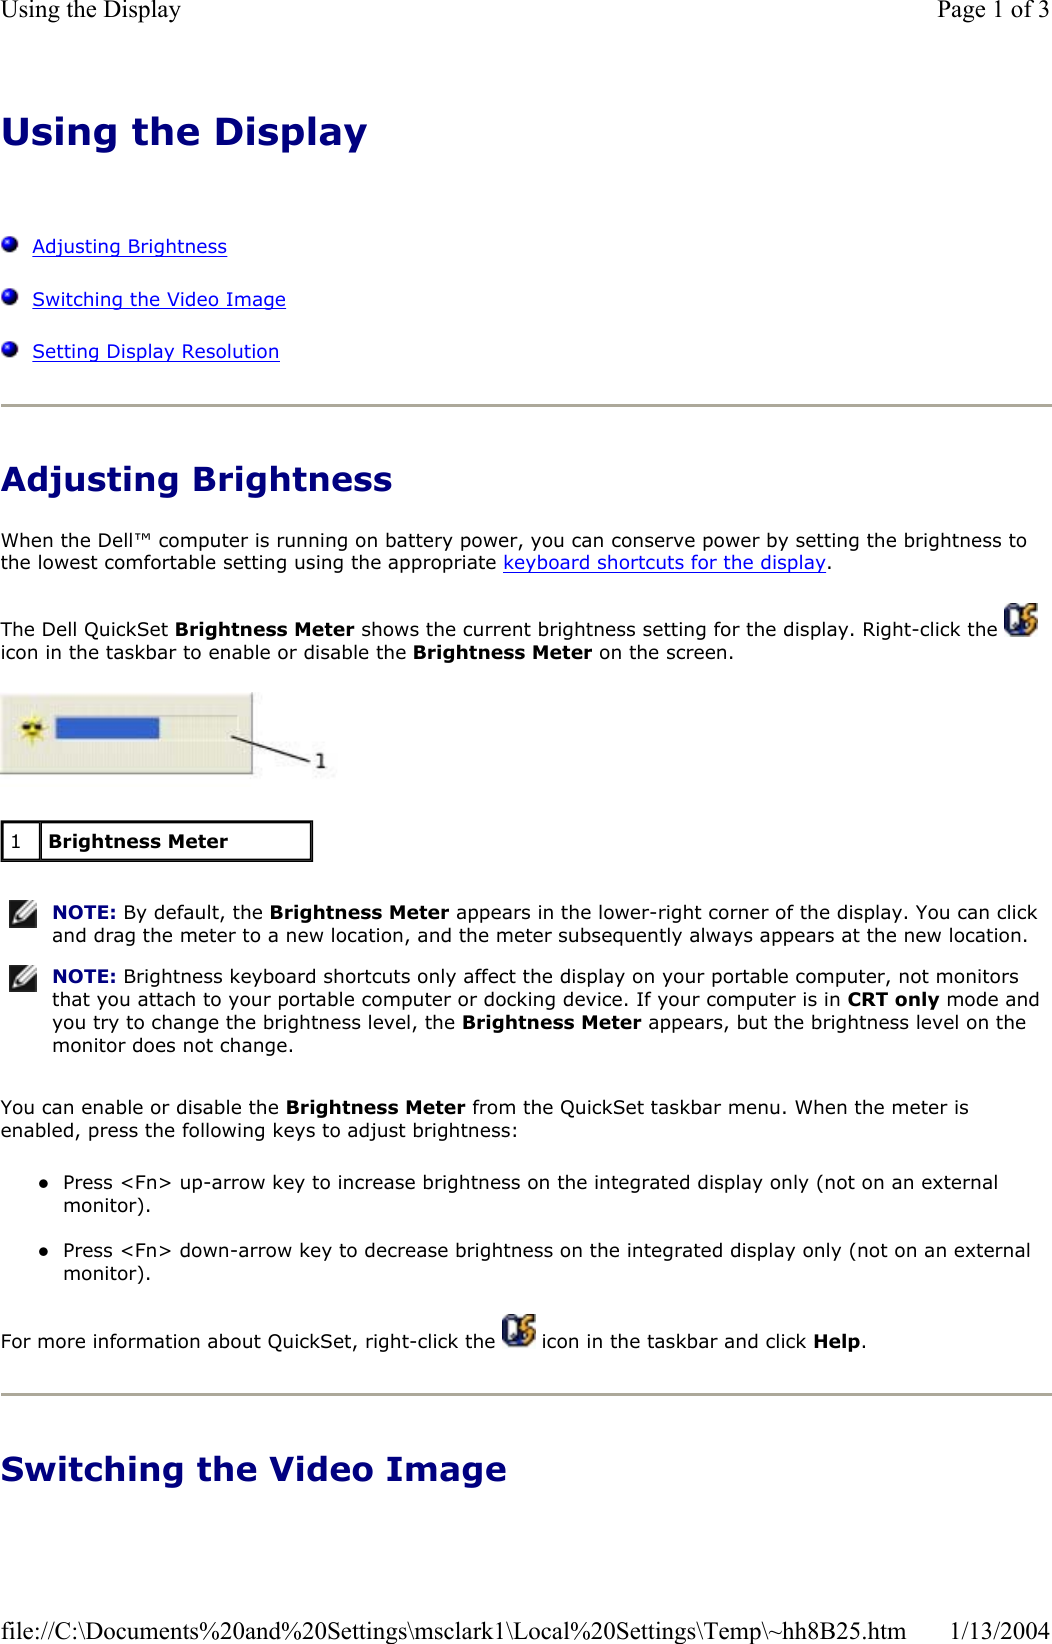 Using the DisplayAdjusting BrightnessSwitching the Video ImageSetting Display ResolutionAdjusting Brightness When the Dell™ computer is running on battery power, you can conserve power by setting the brightness to the lowest comfortable setting using the appropriate keyboard shortcuts for the display.The Dell QuickSet Brightness Meter shows the current brightness setting for the display. Right-click the   icon in the taskbar to enable or disable the Brightness Meter on the screen. You can enable or disable the Brightness Meter from the QuickSet taskbar menu. When the meter is enabled, press the following keys to adjust brightness: zPress &lt;Fn&gt; up-arrow key to increase brightness on the integrated display only (not on an external monitor). zPress &lt;Fn&gt; down-arrow key to decrease brightness on the integrated display only (not on an external monitor). For more information about QuickSet, right-click the   icon in the taskbar and click Help.Switching the Video Image 1Brightness MeterNOTE: By default, the Brightness Meter appears in the lower-right corner of the display. You can click and drag the meter to a new location, and the meter subsequently always appears at the new location.NOTE: Brightness keyboard shortcuts only affect the display on your portable computer, not monitors that you attach to your portable computer or docking device. If your computer is in CRT only mode and you try to change the brightness level, the Brightness Meter appears, but the brightness level on the monitor does not change.Page 1 of 3Using the Display1/13/2004file://C:\Documents%20and%20Settings\msclark1\Local%20Settings\Temp\~hh8B25.htm